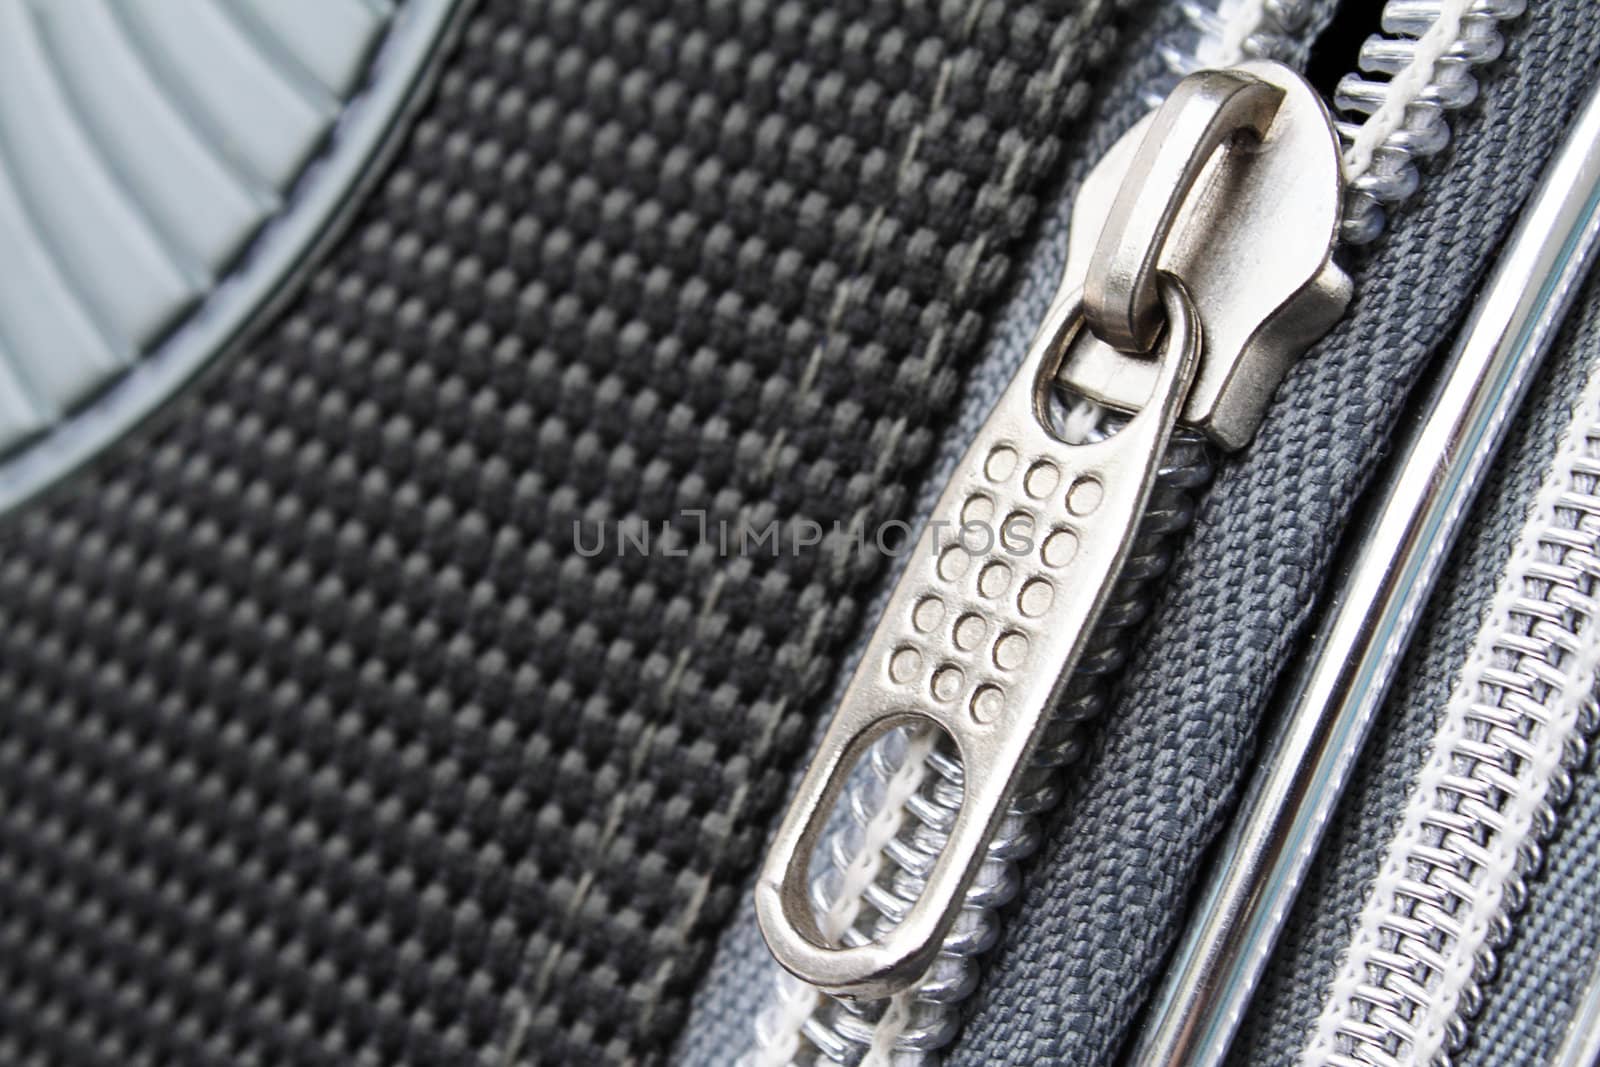 A zipper on the suitcase by pulen